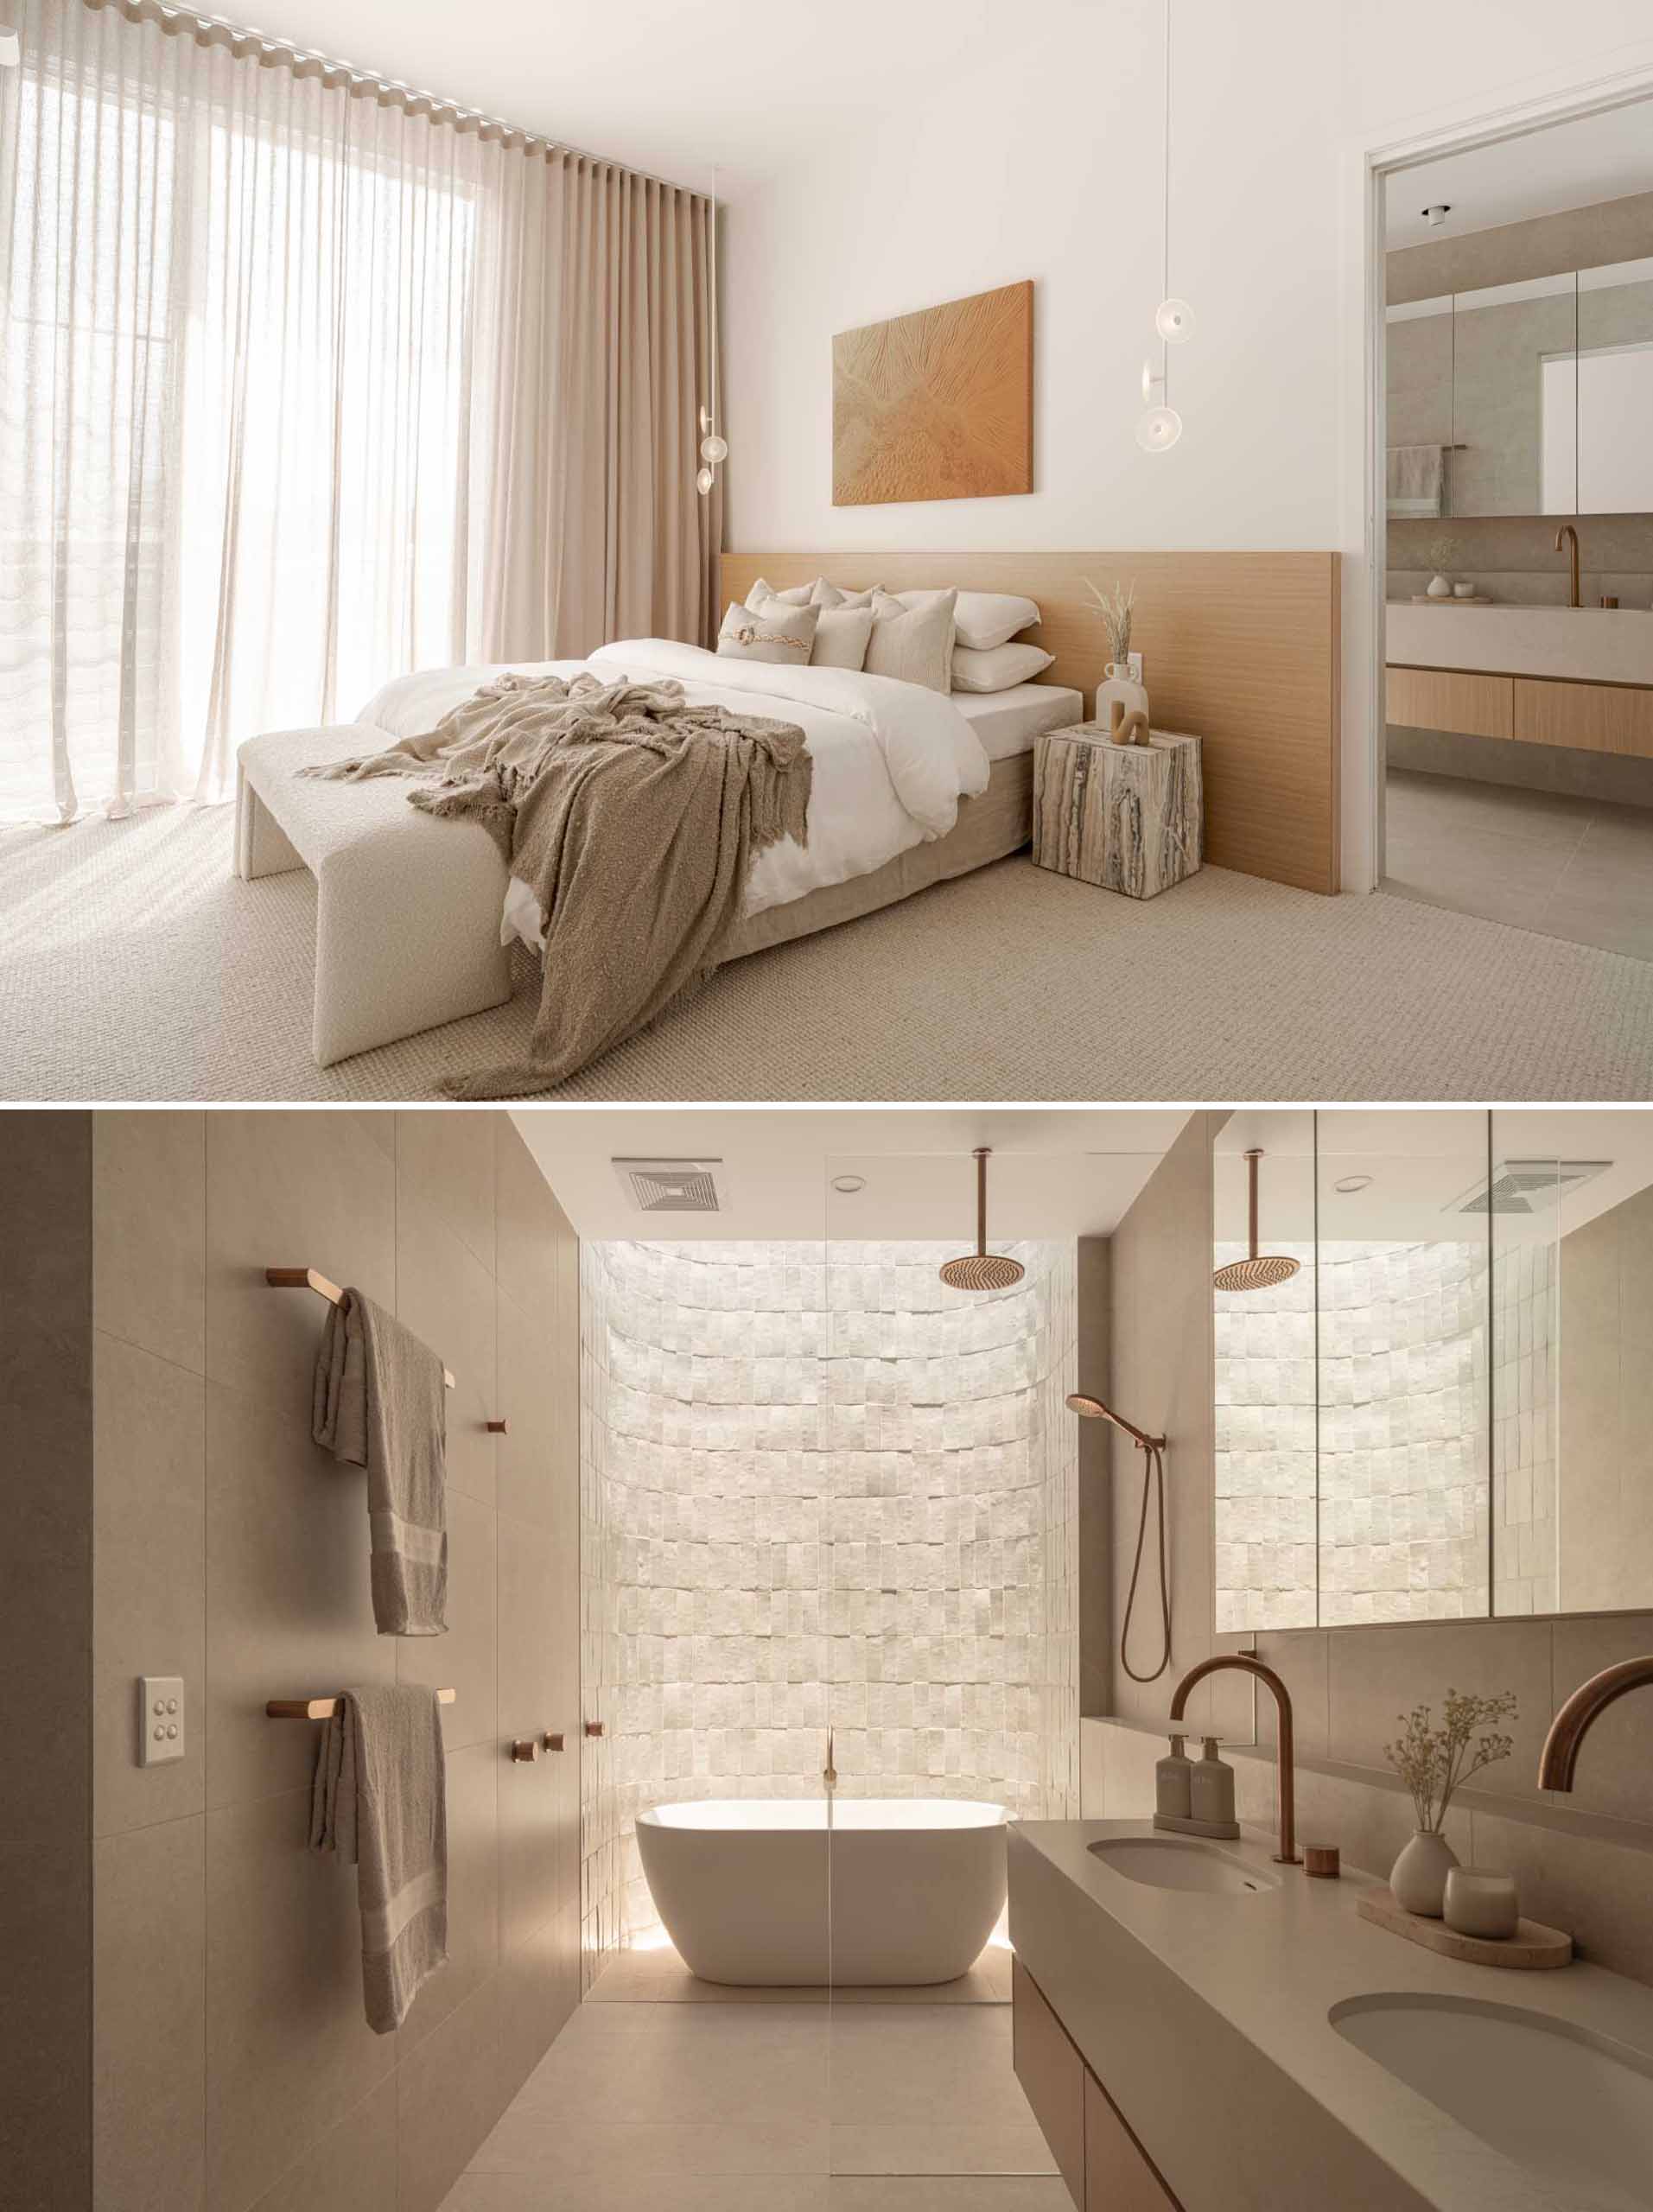 This contemporary primary bedroom features a wood headboard, while in the ensuite bathroom, sunlight cascades through the sky window, illuminating the uneven textures of the handmade Moroccan bejmat tiles, often evoking strong emotional reactions a،st visitors.